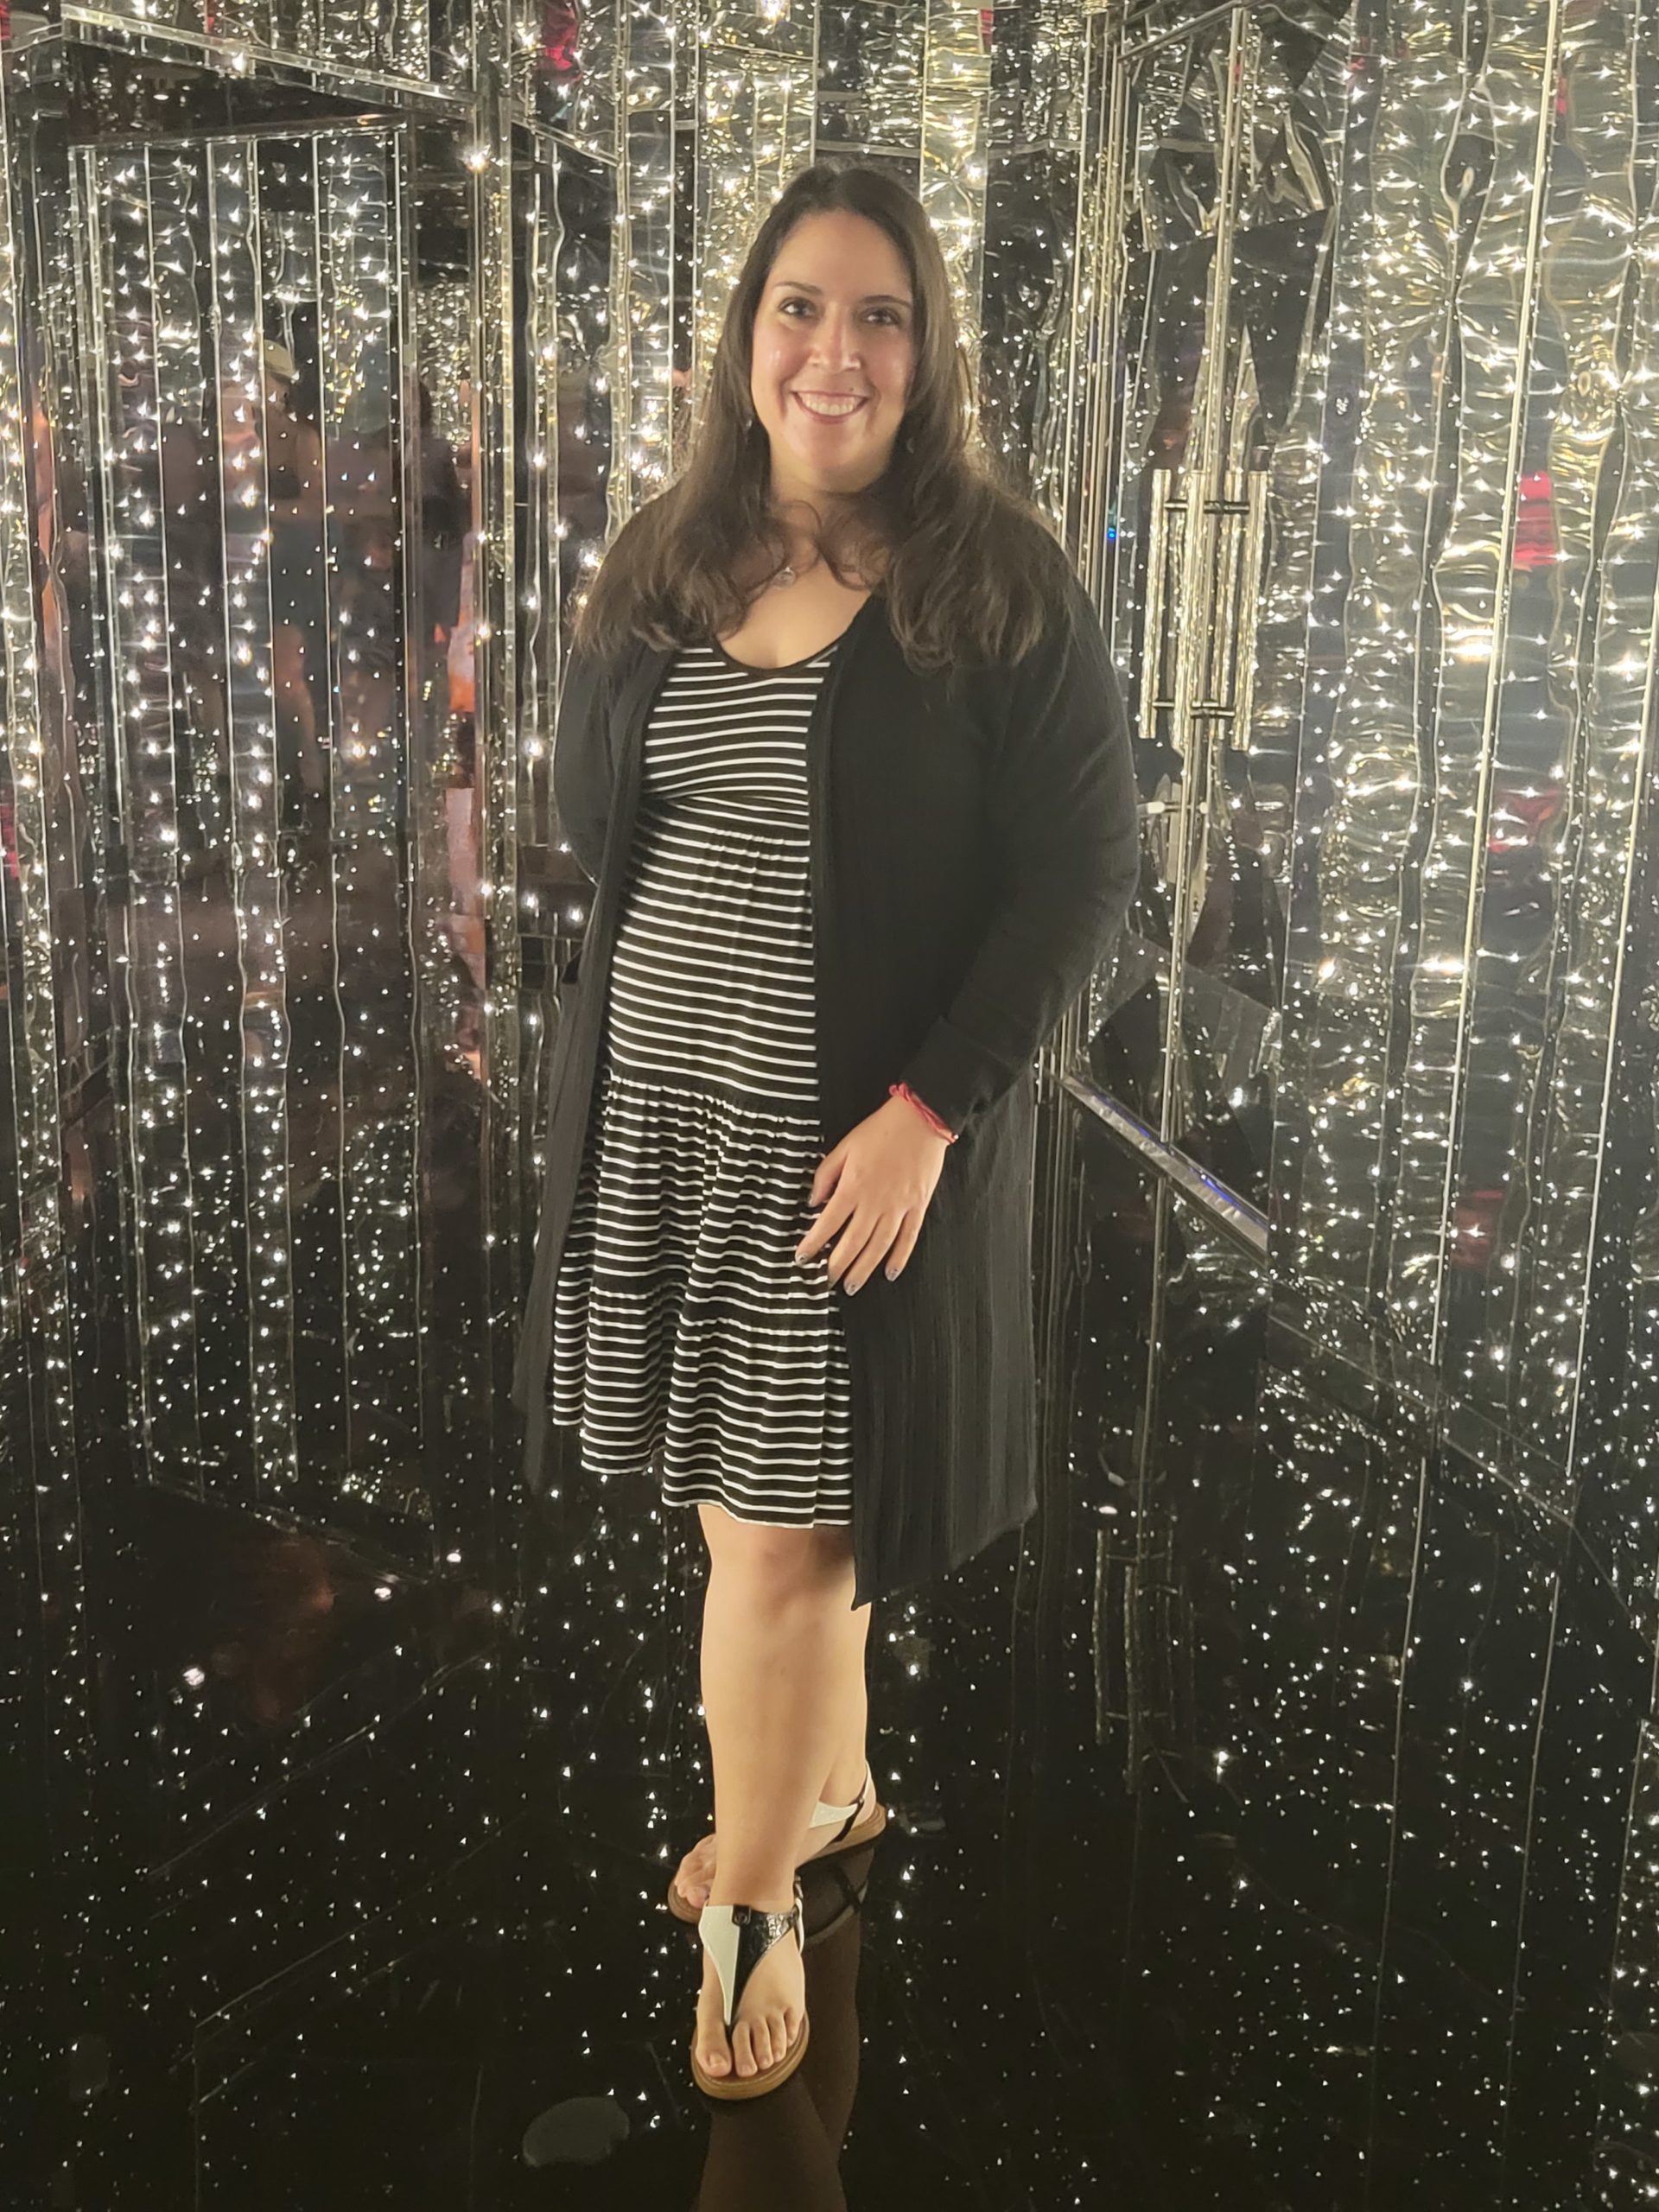 Millenial female standing in glittering hallway with black and white striped dress and black cardigan on.